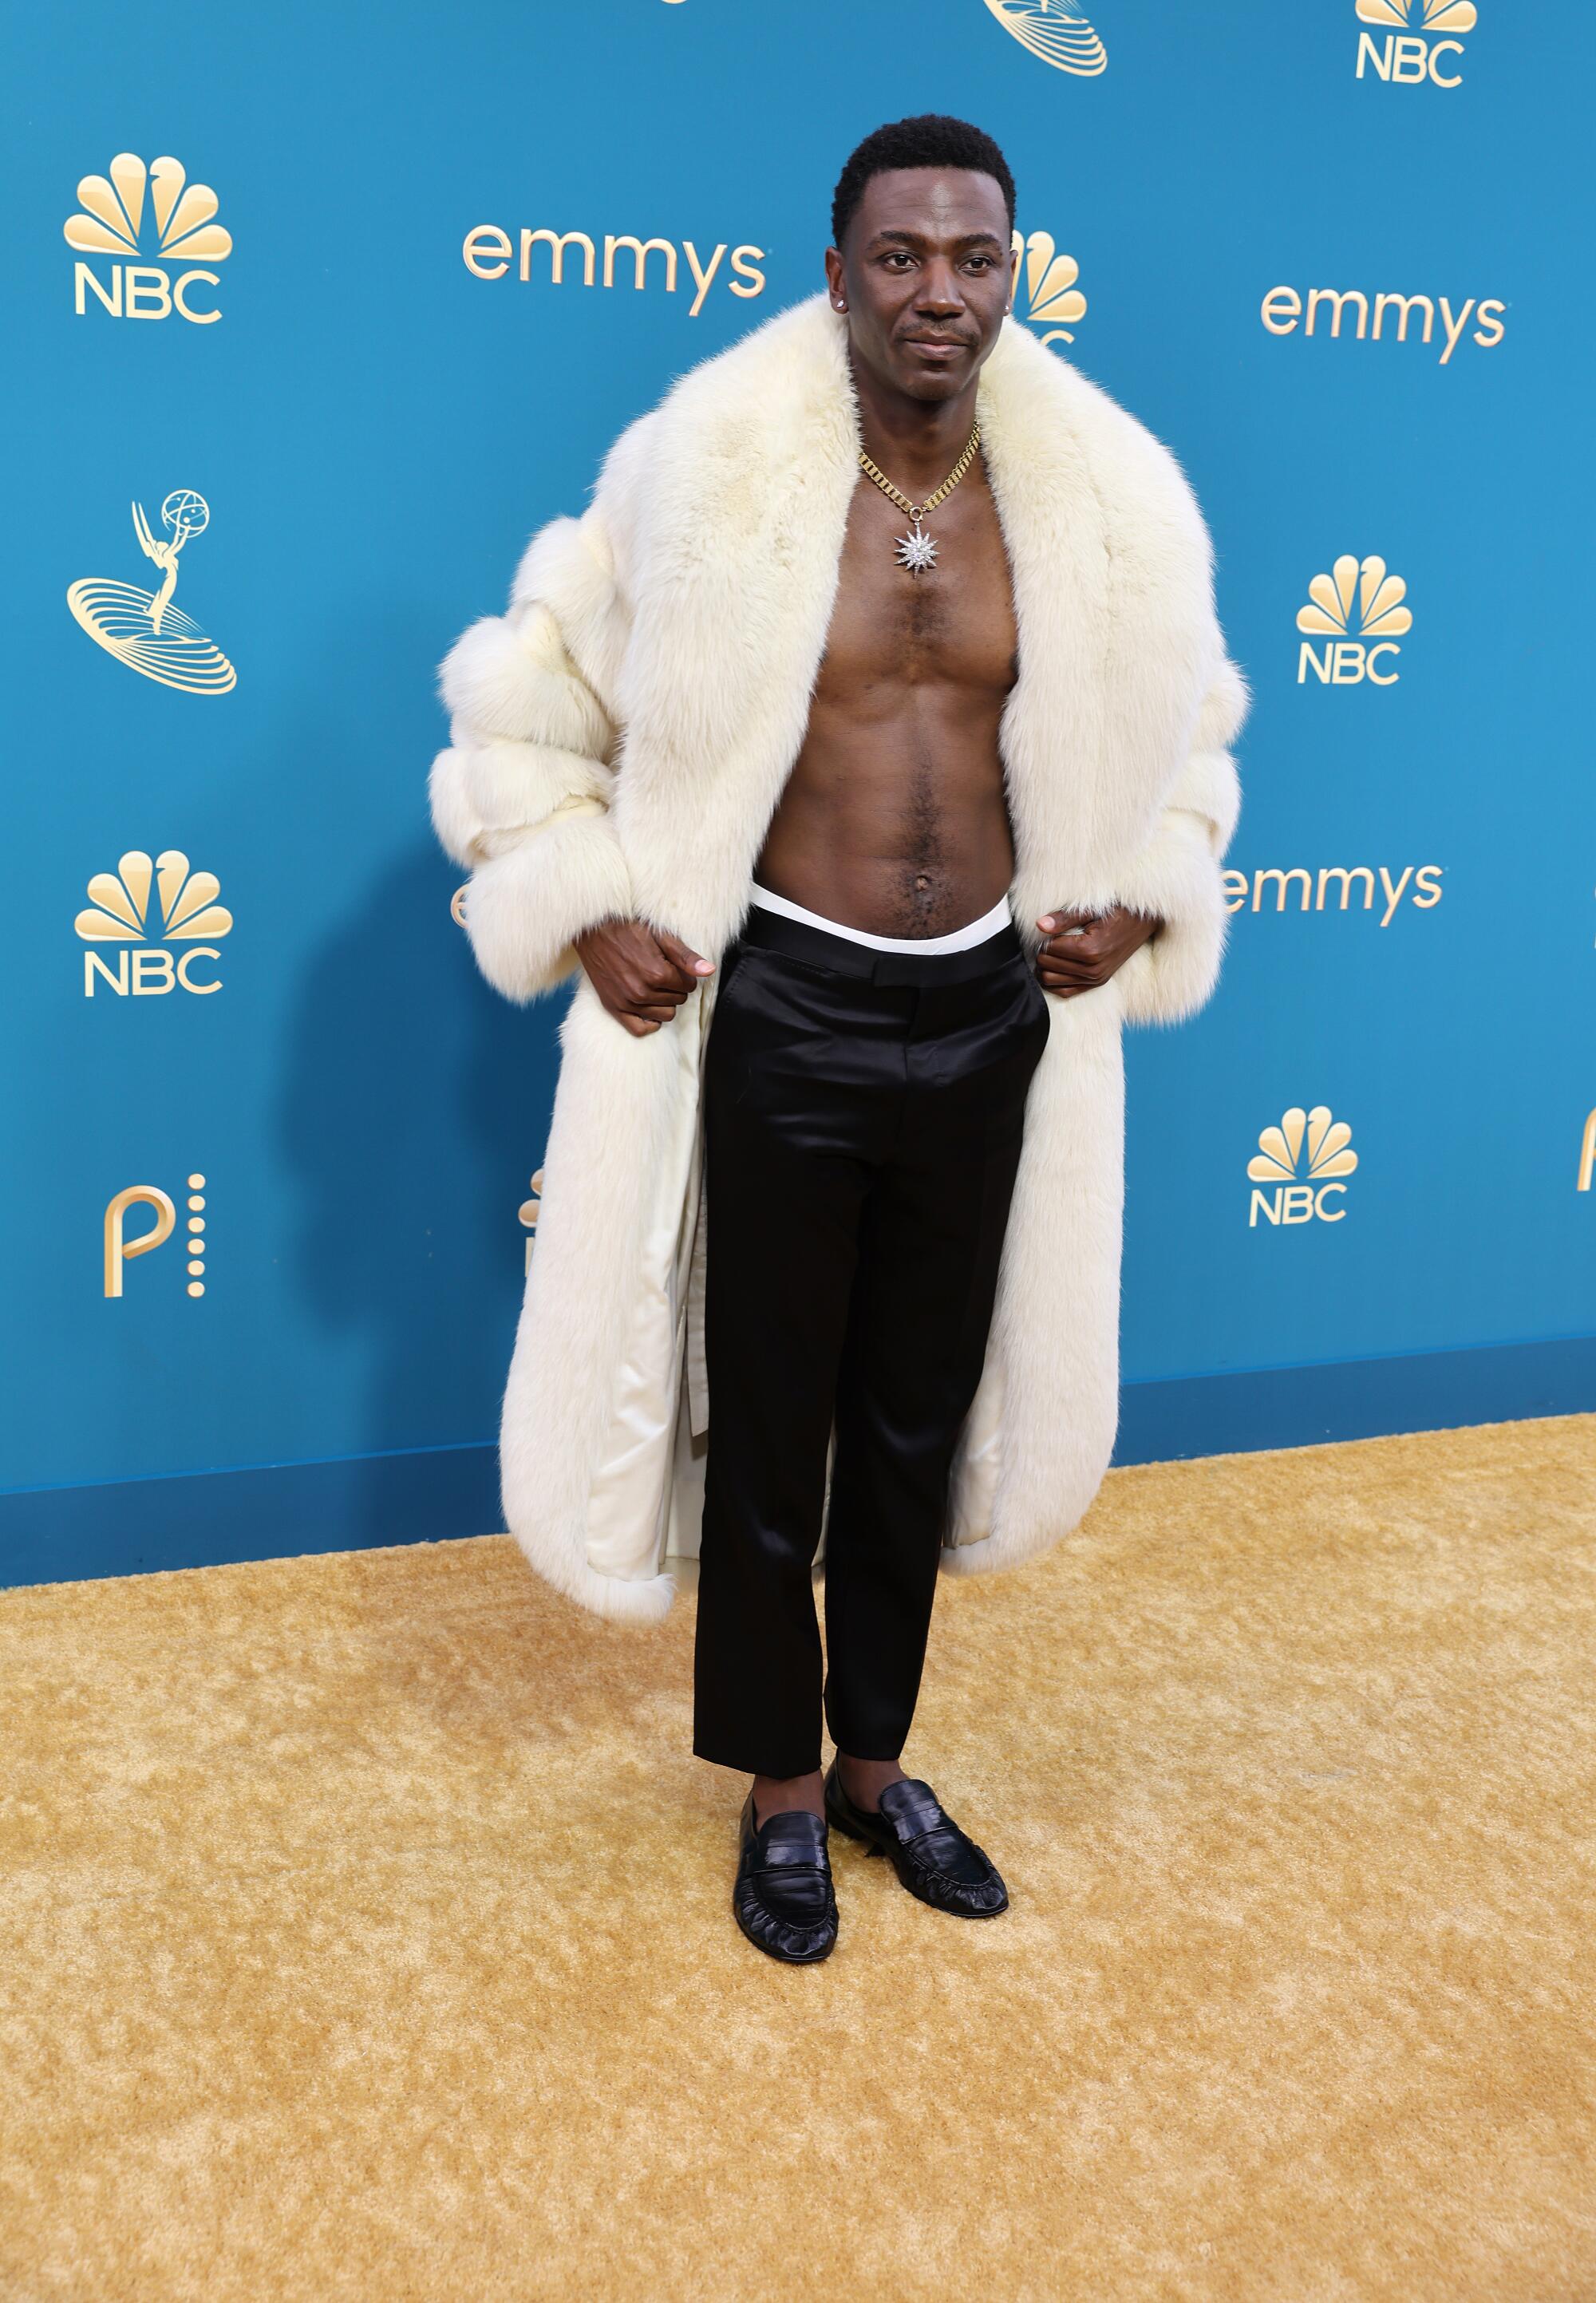 A man in a white fur coat and no shirt walks the red carpet at an awards show